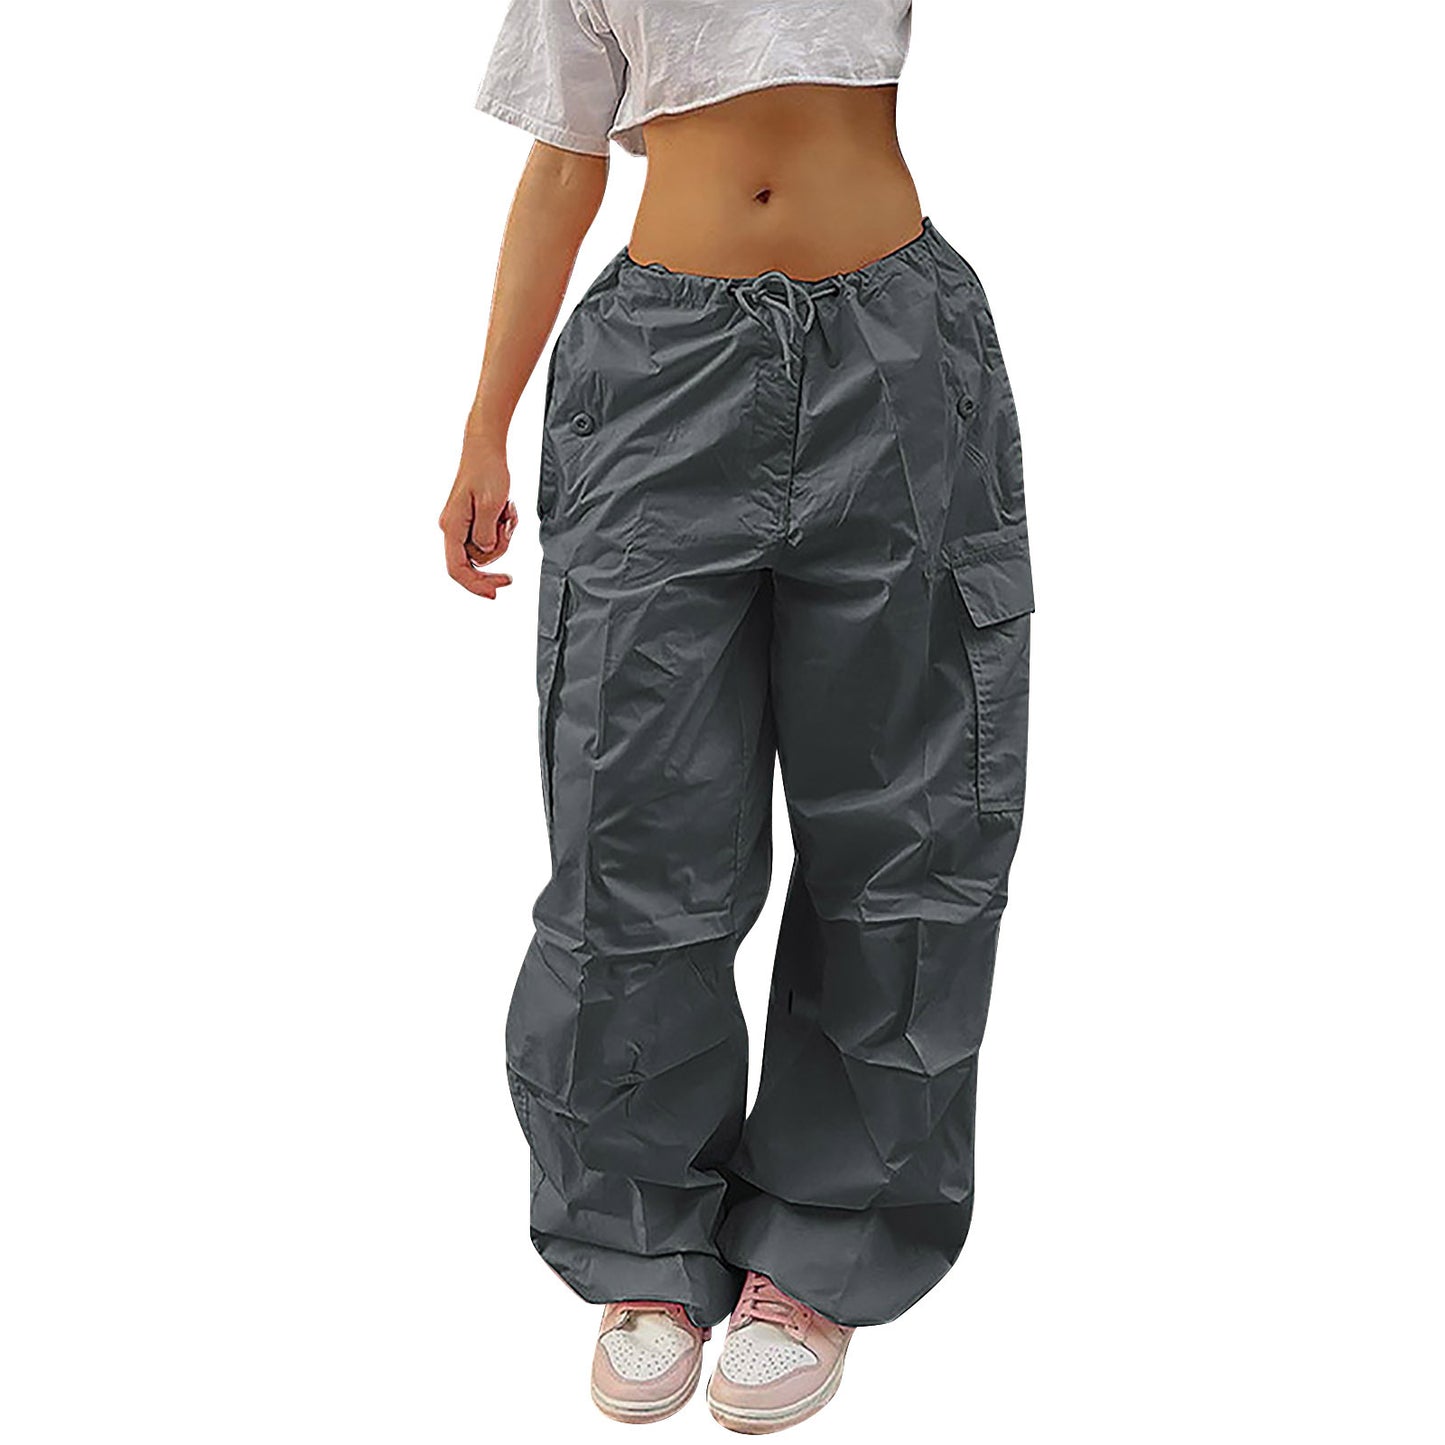 Solid Colours Drawstring Casual Cargo Pants Suit Girls - ROMART GLOBAL LTD